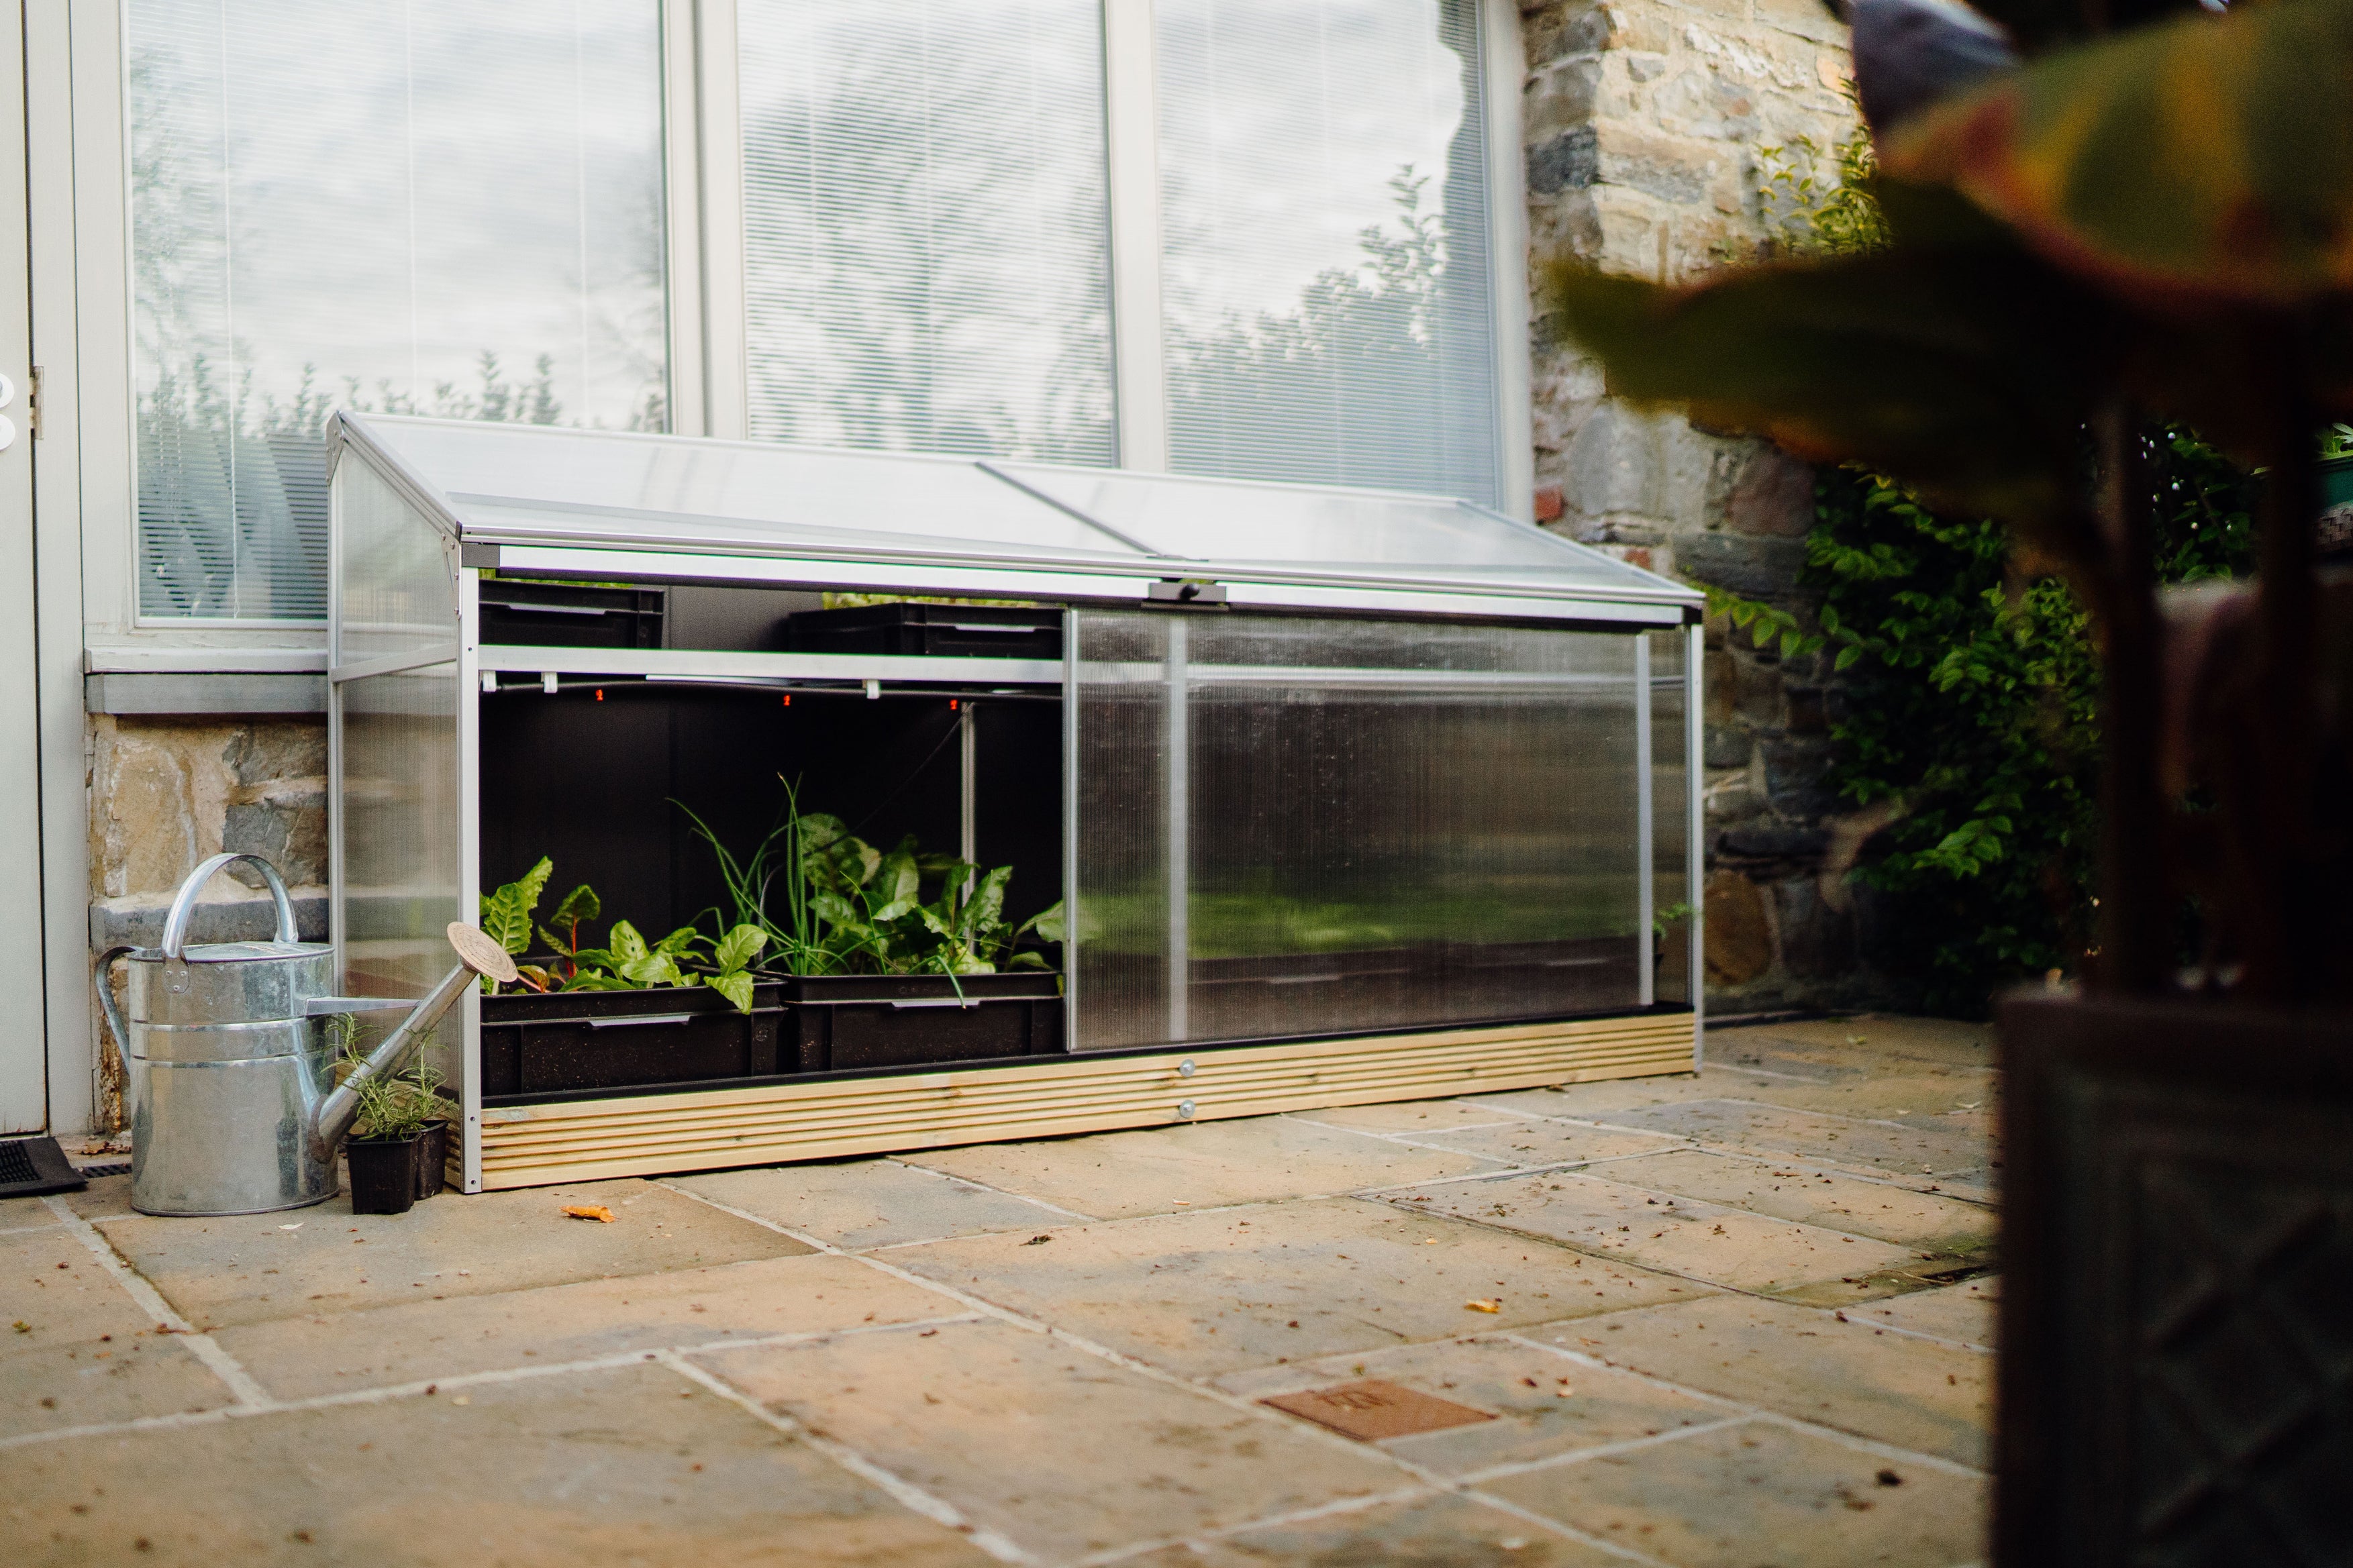 Mini greenhouse with Smart features (Harvst/PA)